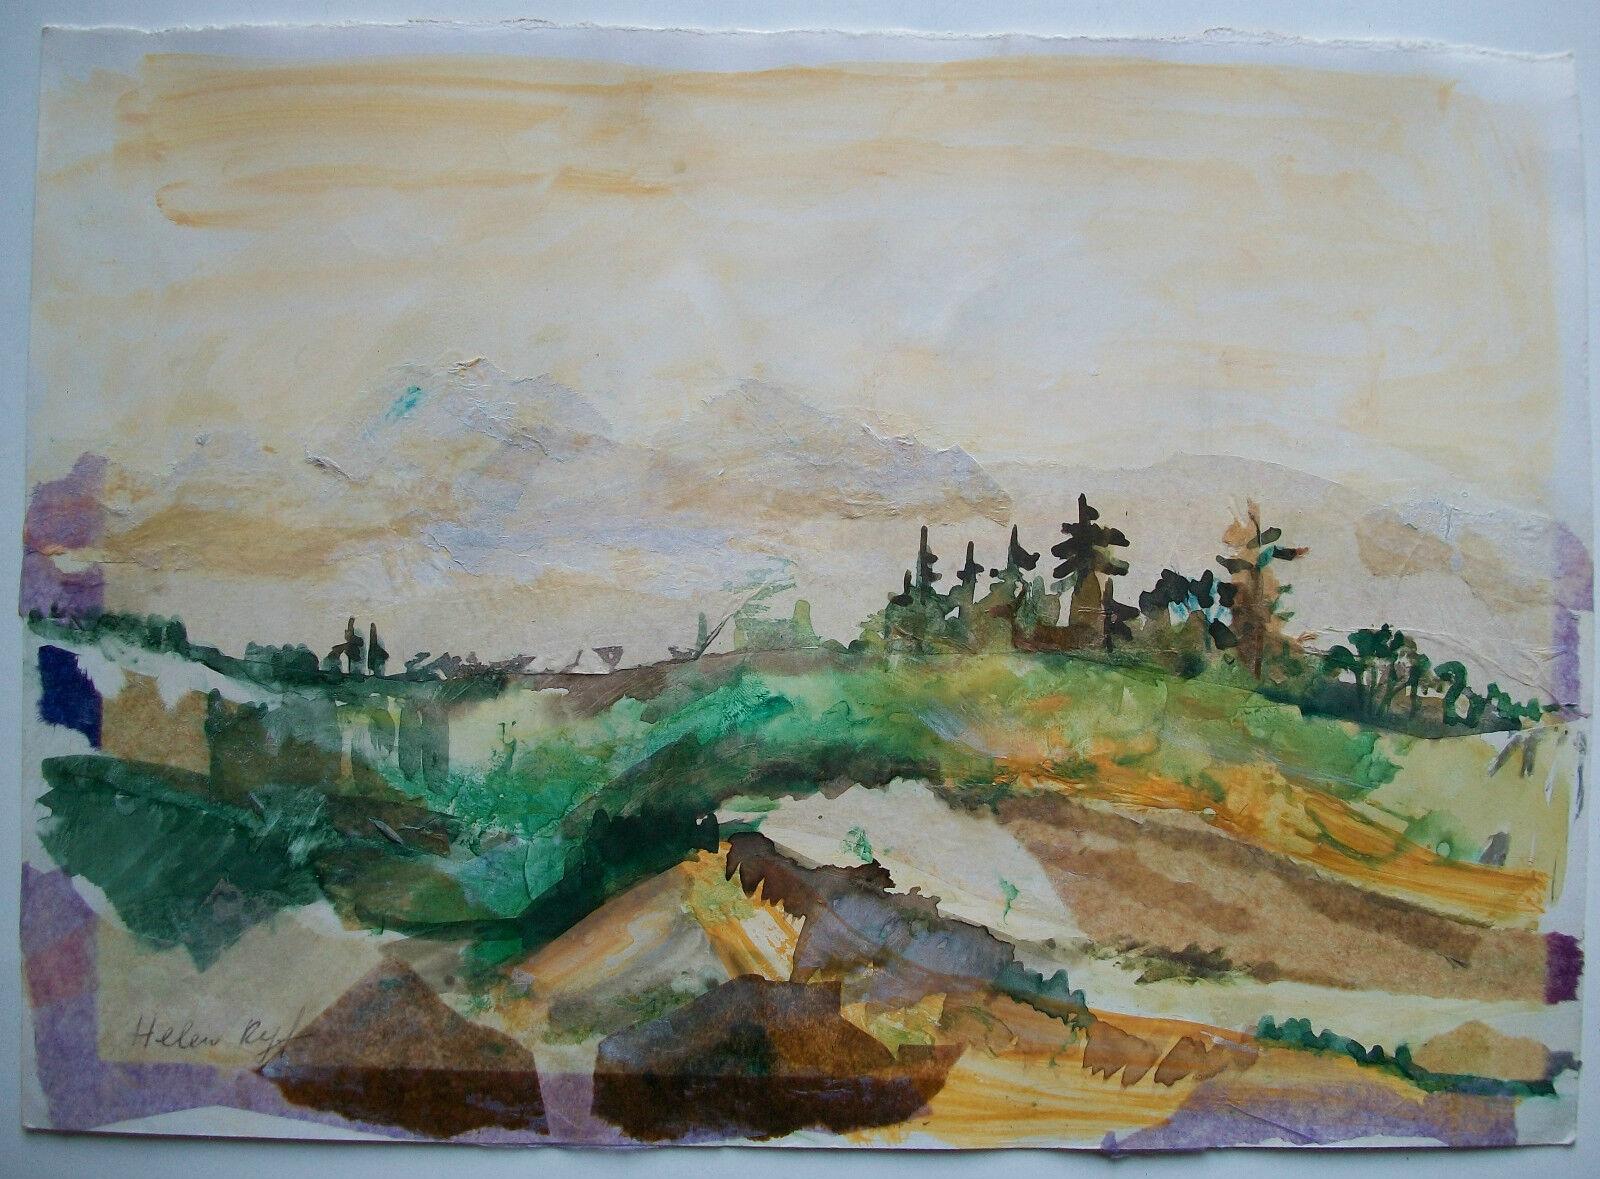 HELEN RYF, Vintage Mixed Media/Collage Landscape Painting, Canada, Circa 1990 In Good Condition For Sale In Chatham, ON